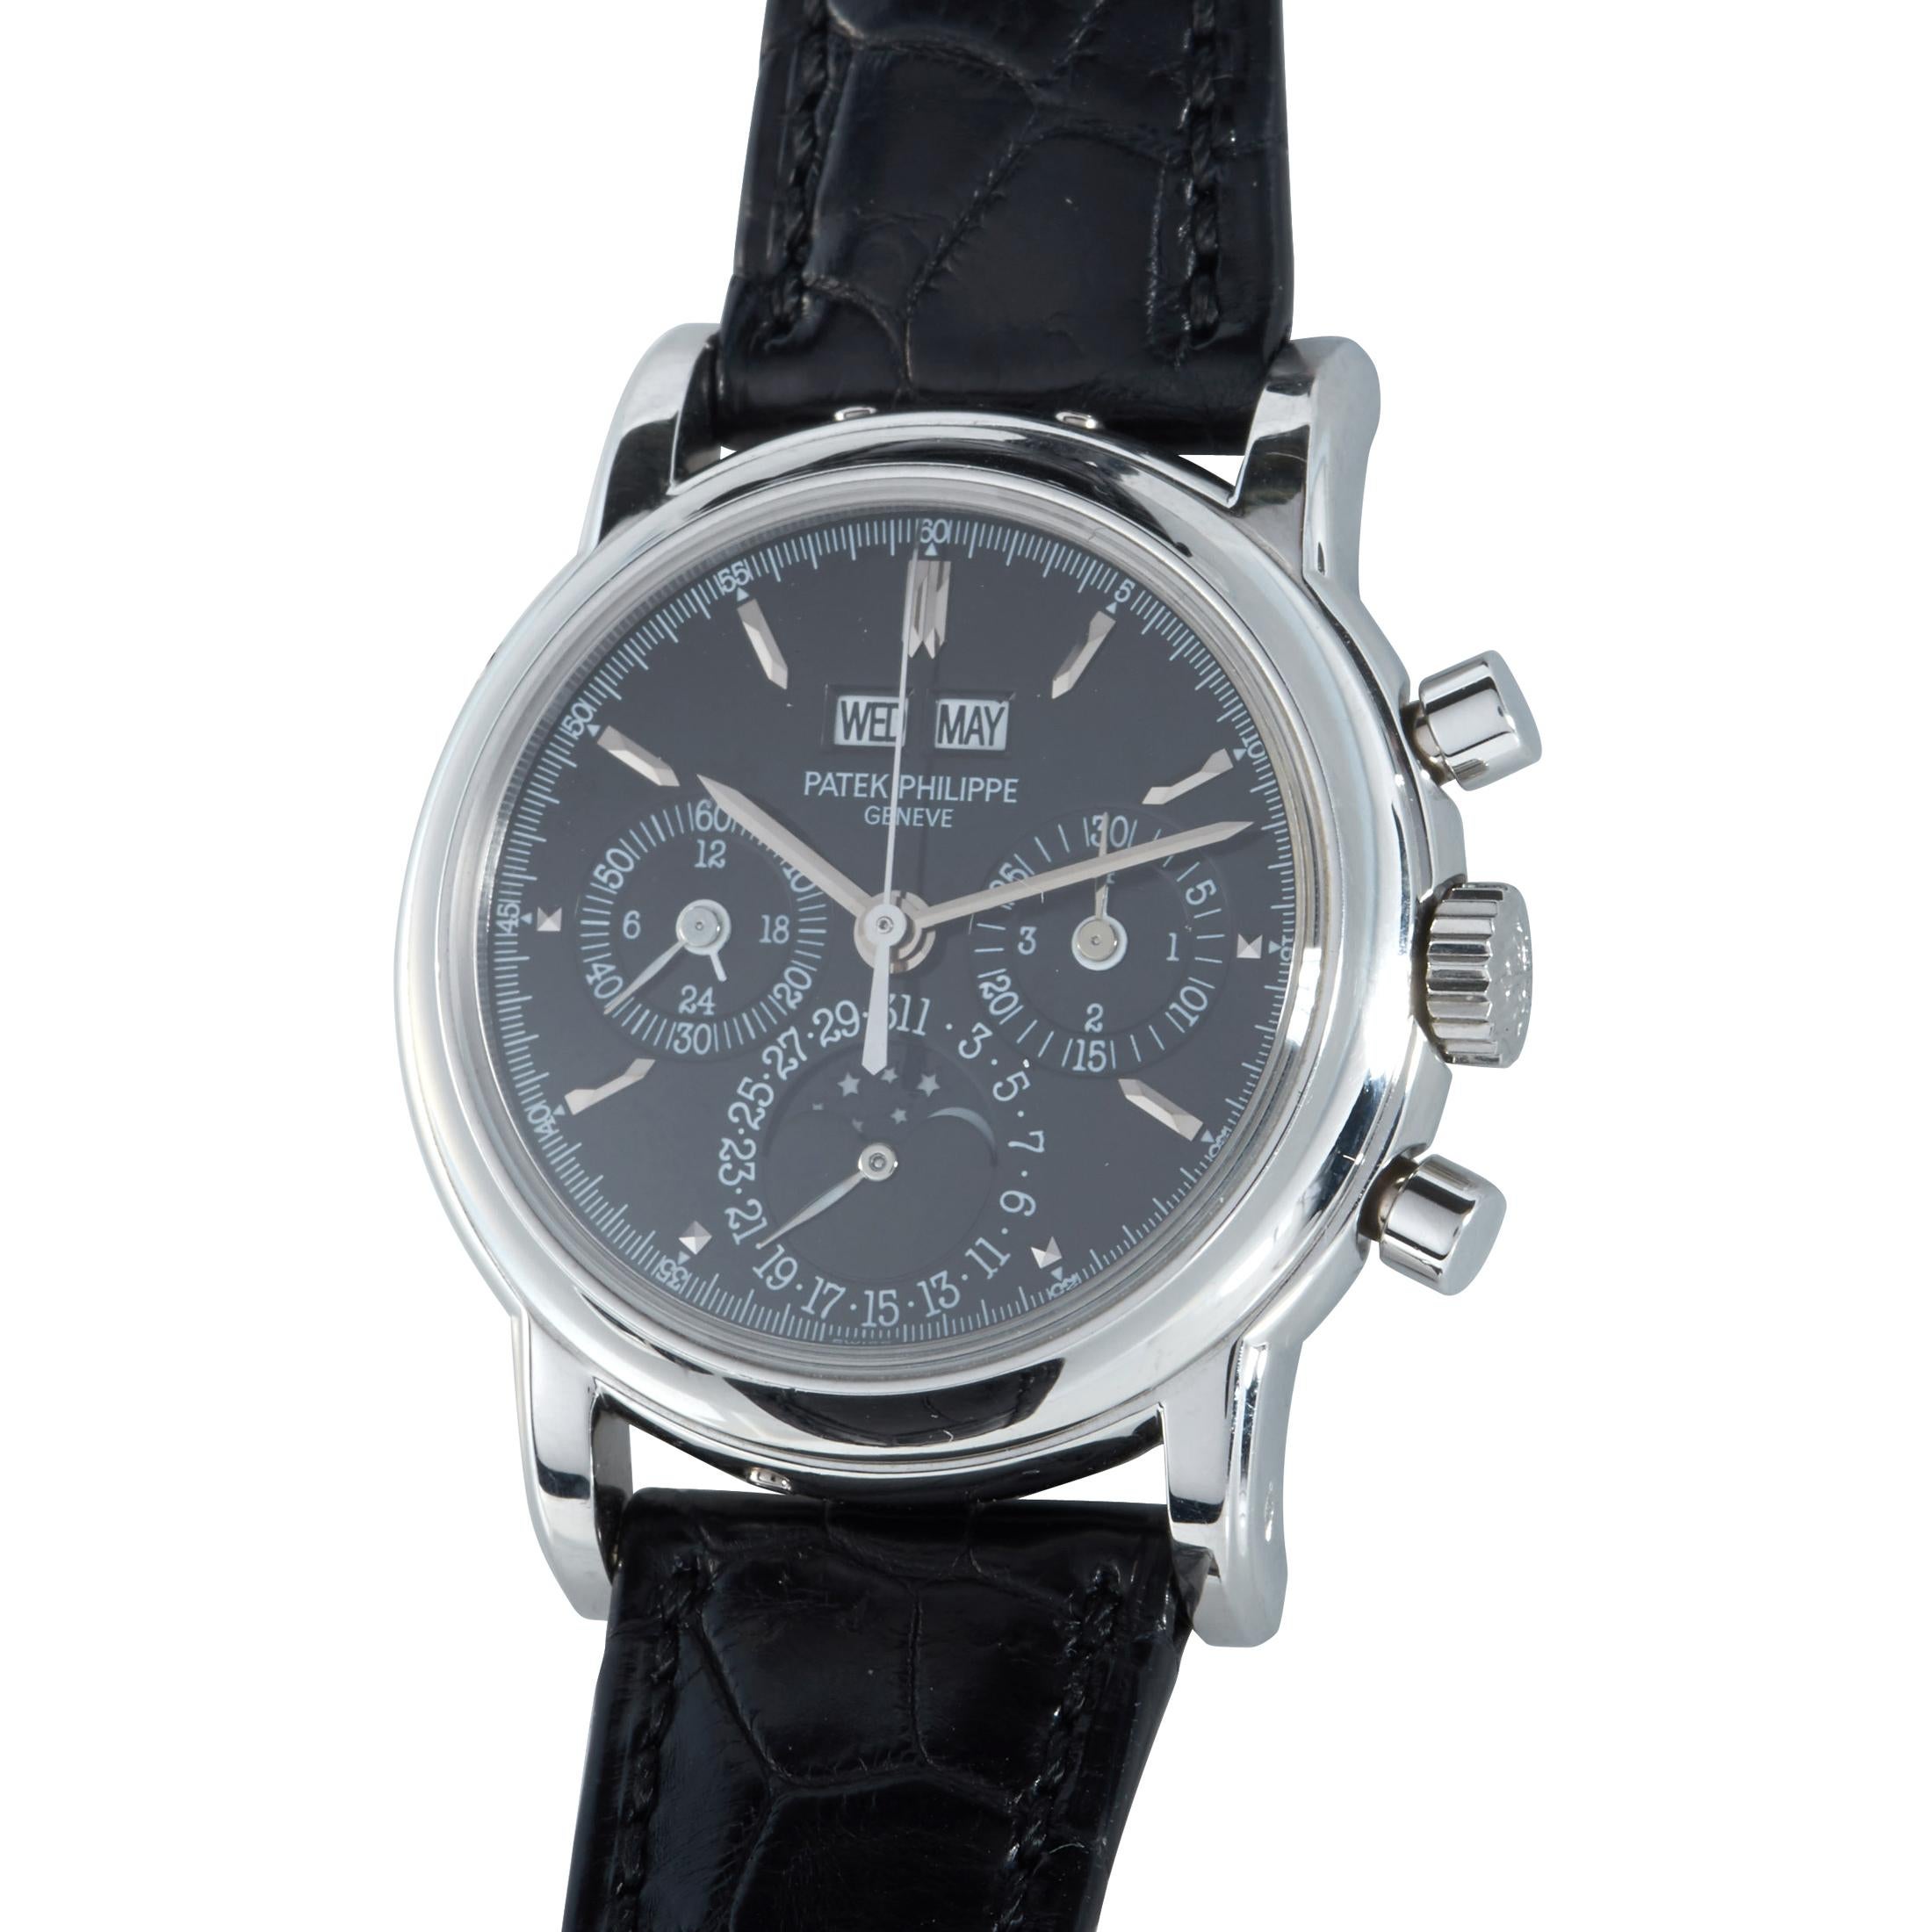 This is the Patek Philippe Perpetual Calendar Chronograph, reference number 3970E.

The watch is presented with a 36 mm platinum case that boasts see-through back that can be covered. The case is mounted onto a black leather strap fitted with a